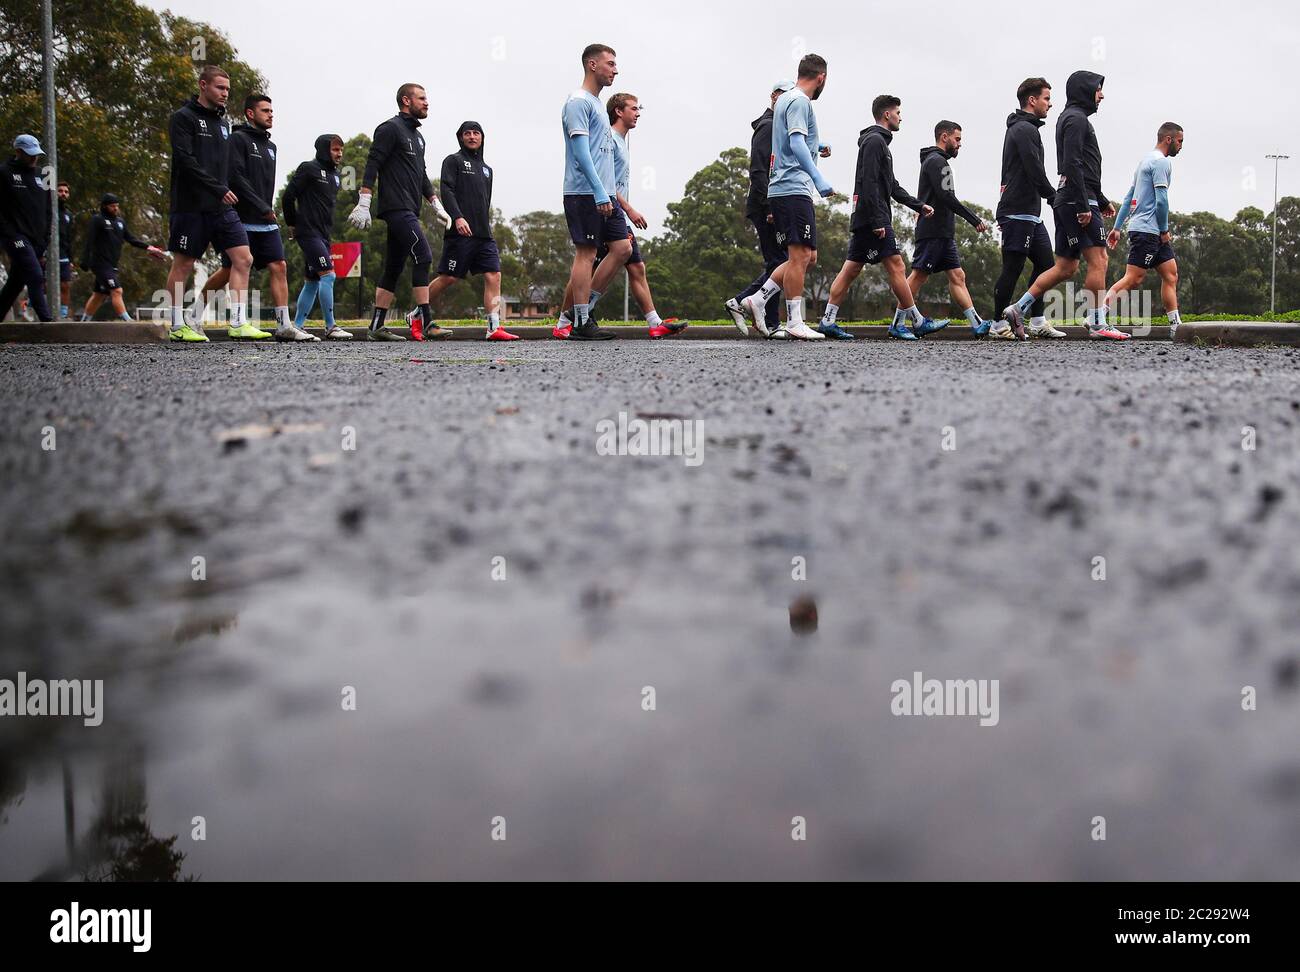 Sydney, Australia. 17th June, 2020. Players of Sydney FC arrive before a training session at Macquarie University in Sydney, Australia, on June 17, 2020. Australia's highest-level professional men's soccer league A-league is set to resume on July 16 with Melbourne Victory taking on Western United at AAMI Park in Melbourne. Credit: Bai Xuefei/Xinhua/Alamy Live News Stock Photo